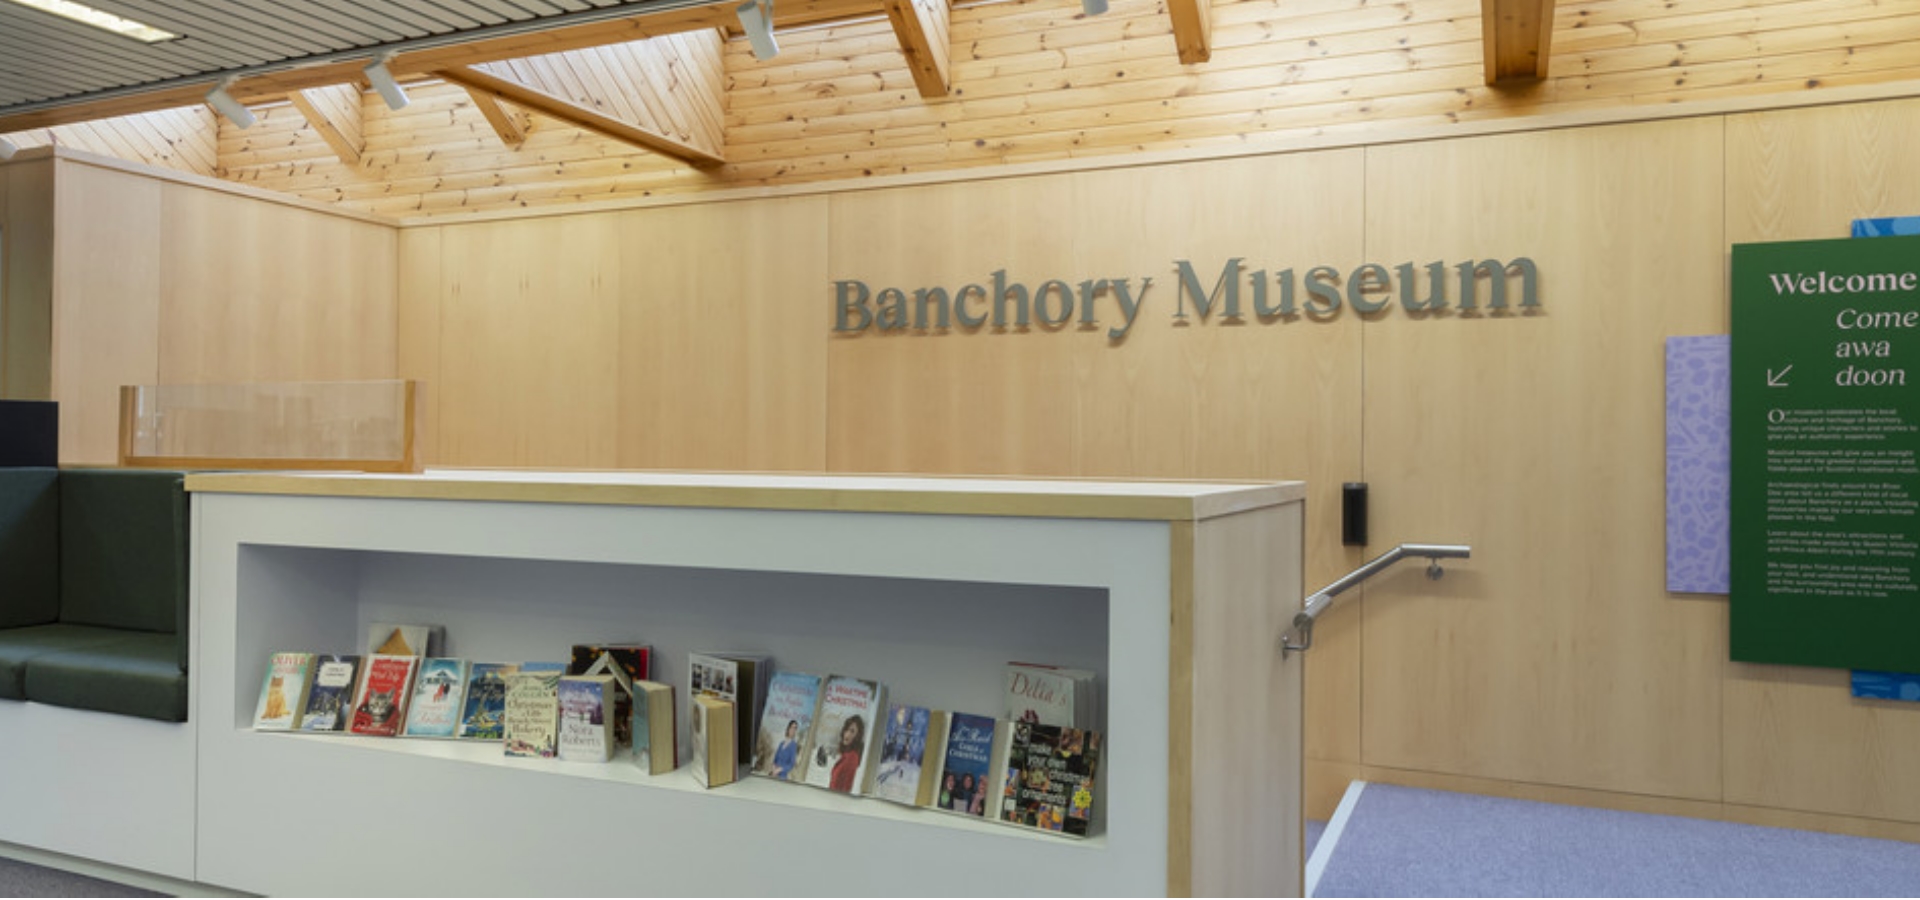 The entrance to Banchory Museum